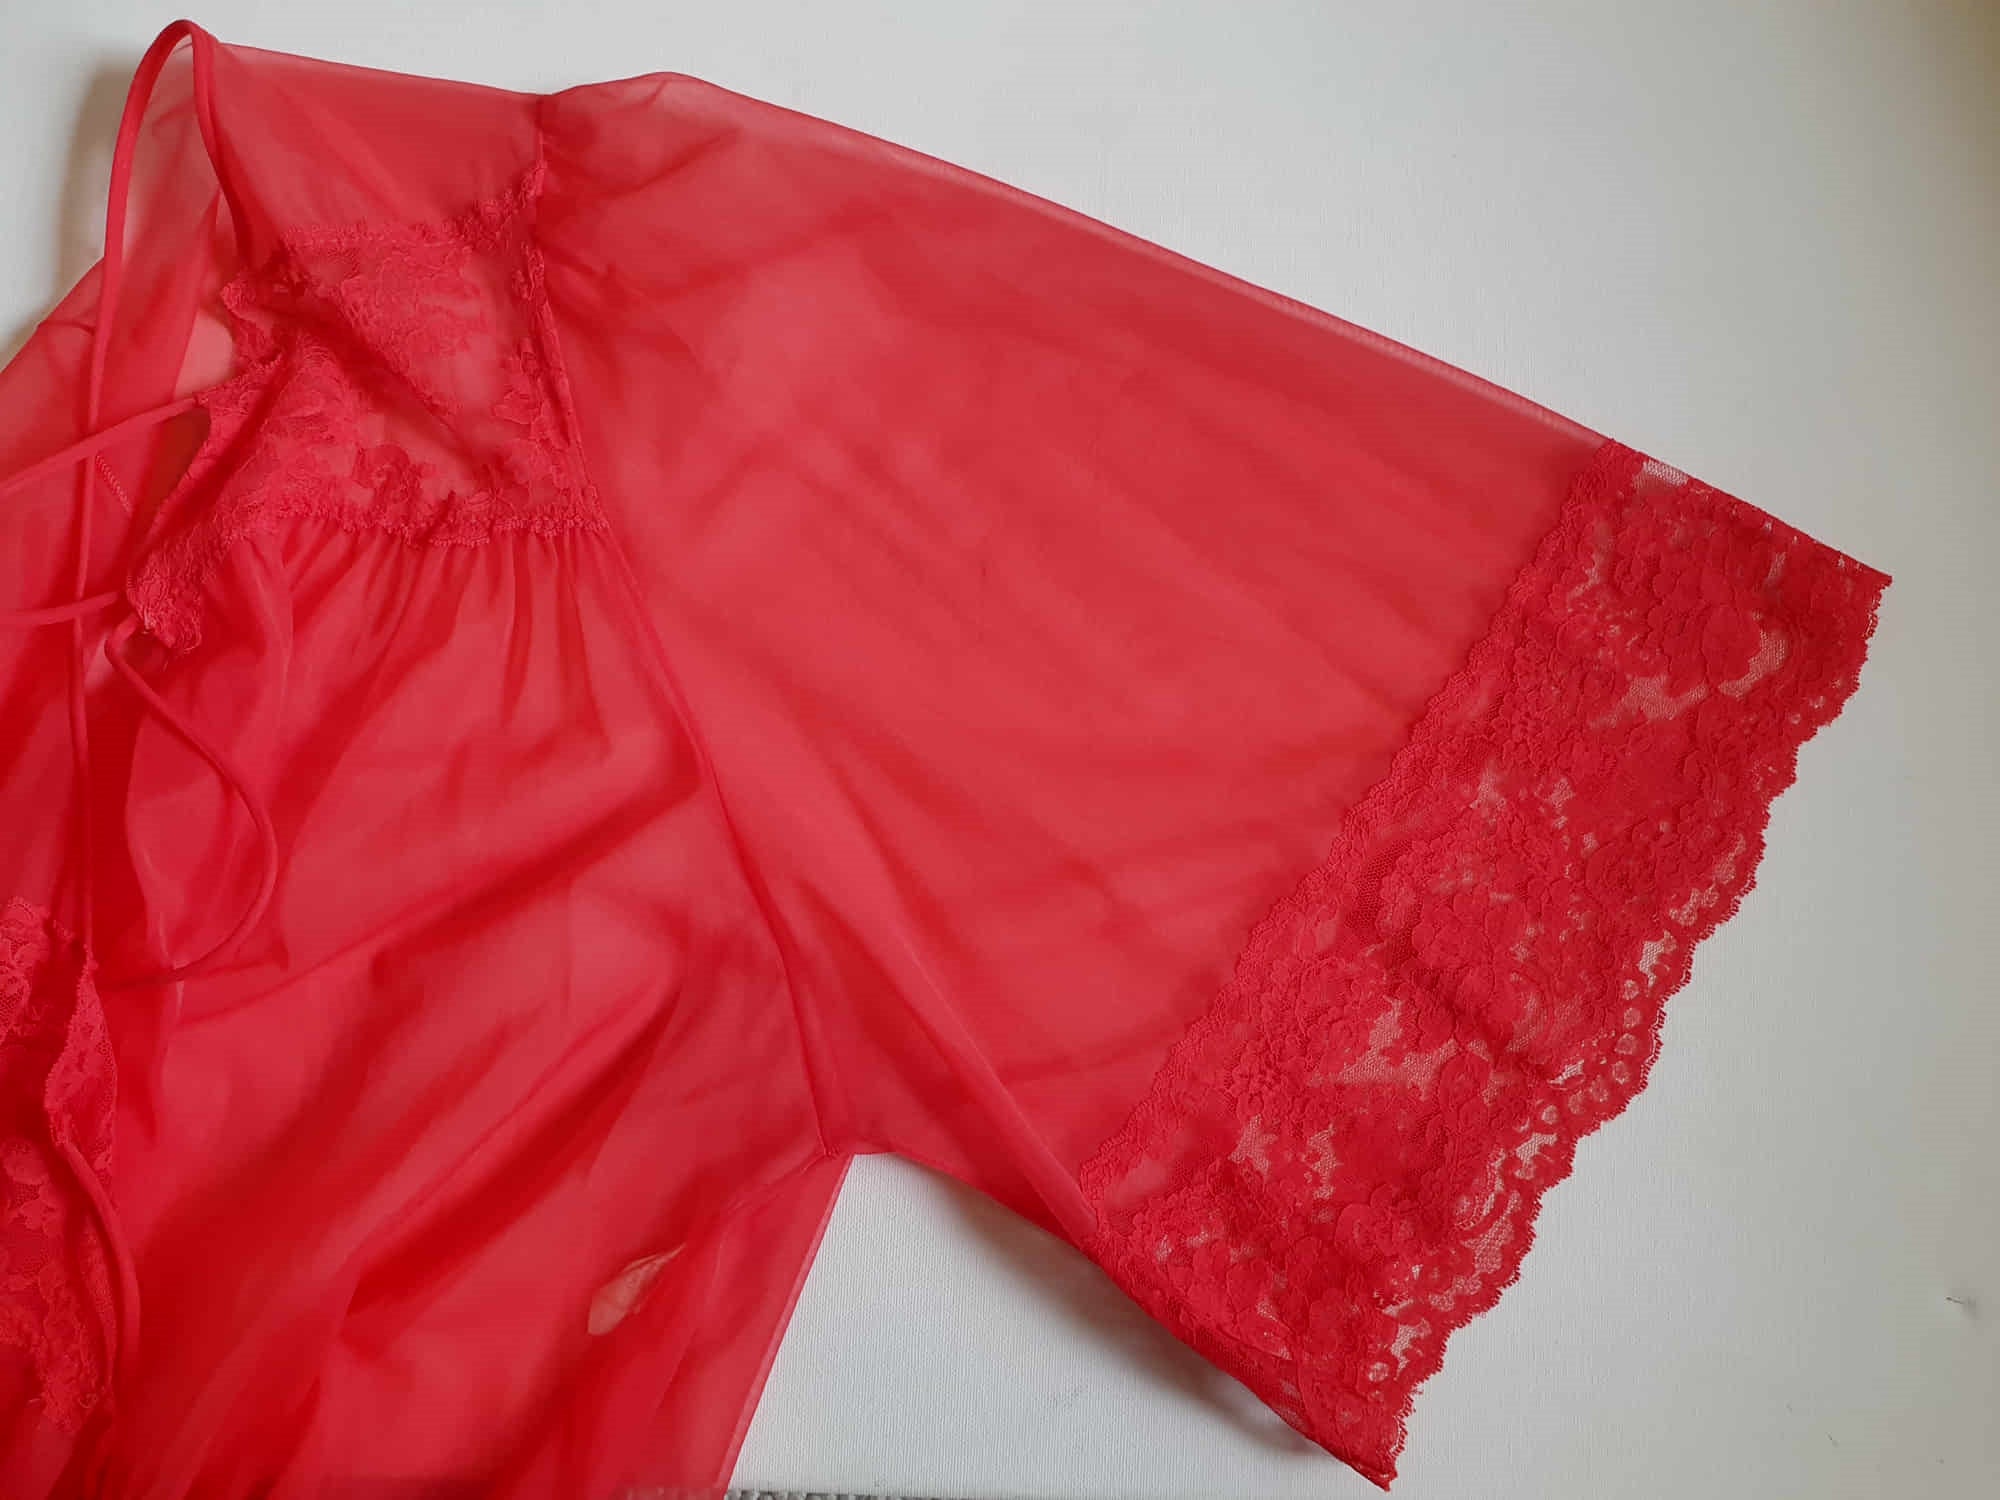 1960s vintage sheer red nightgown and peignoir negligee set Medium